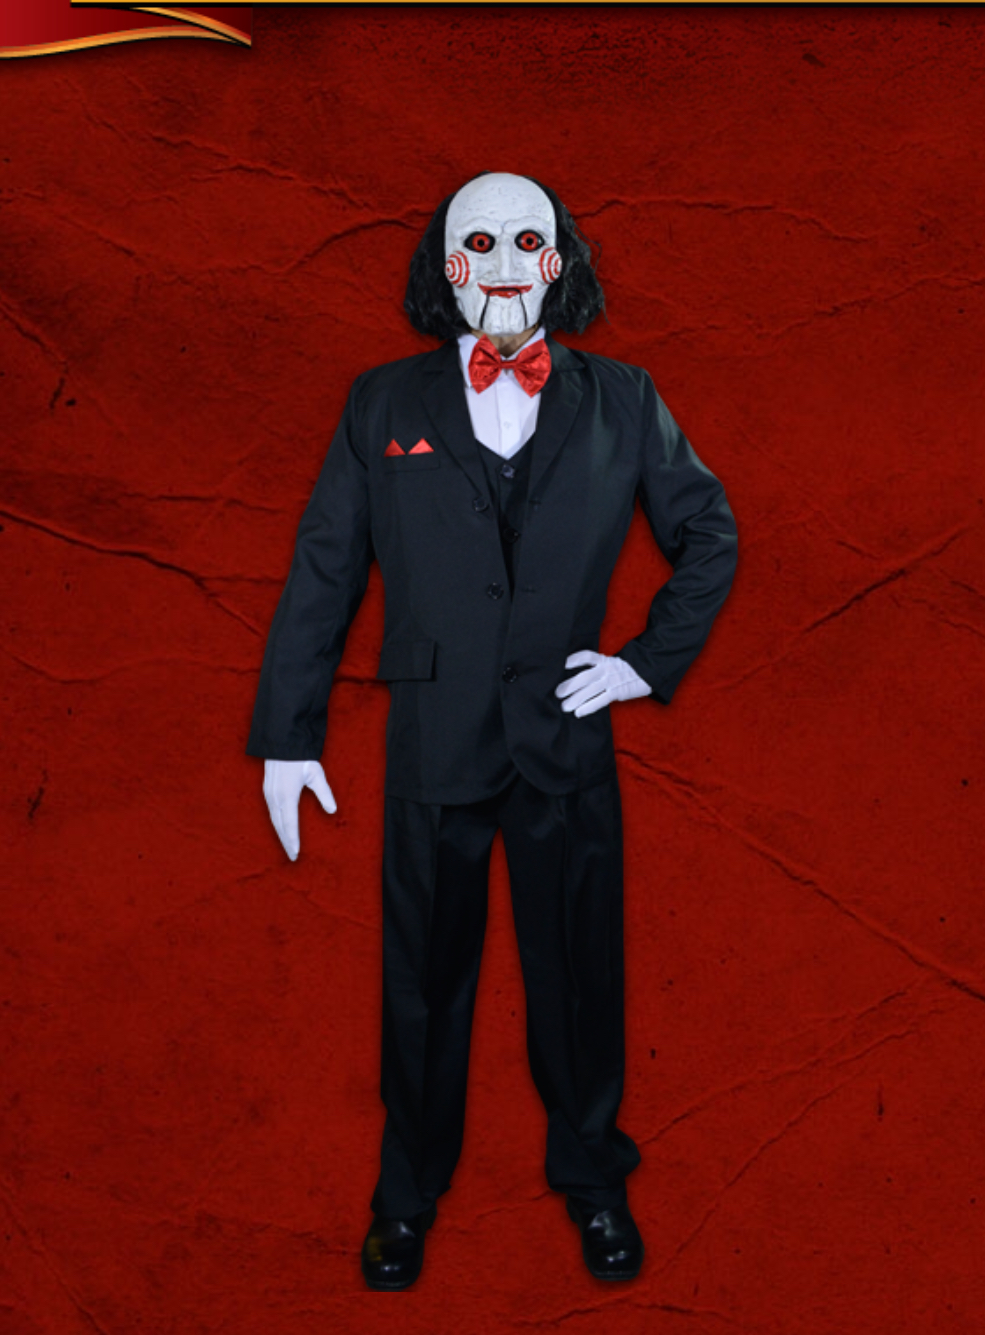 SAW Billy the Puppet costume